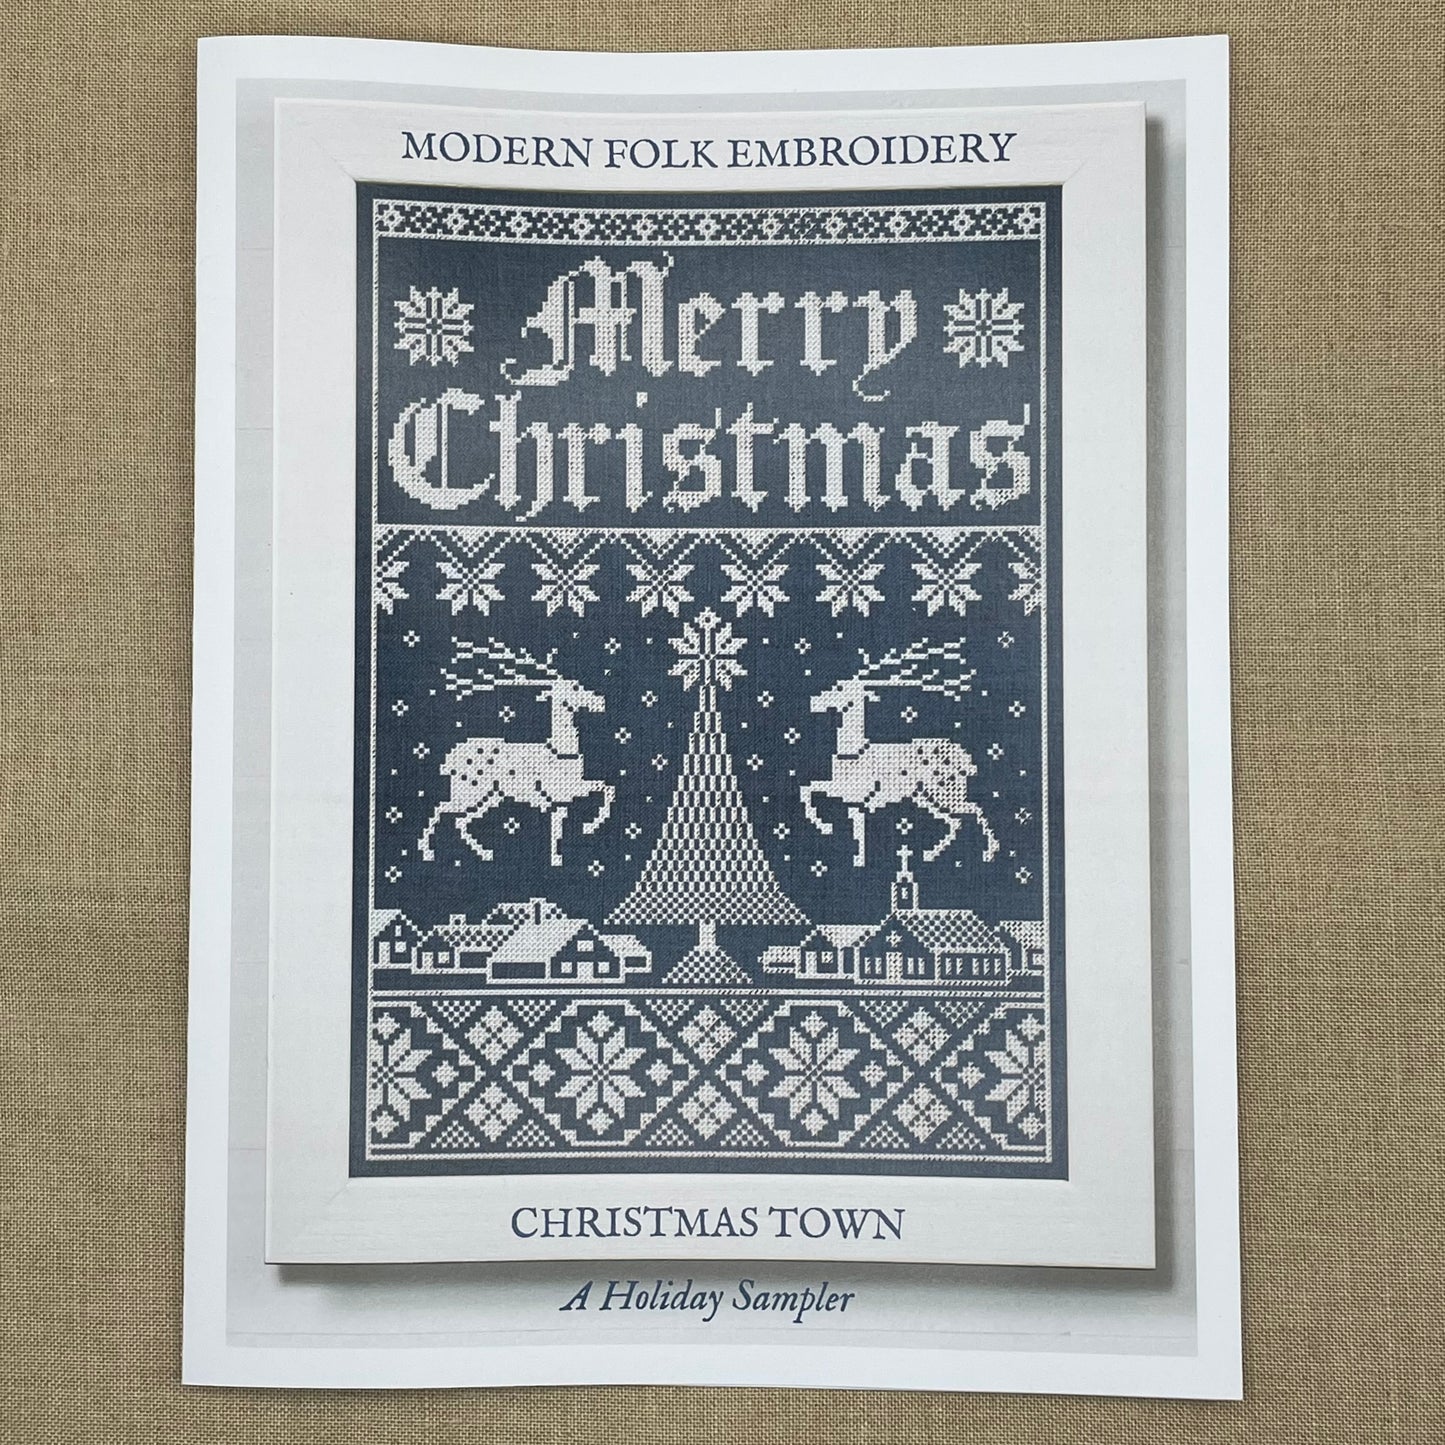 Modern Folk Embroidery - Christmas Town: A Holiday Sampler - Booklet Chart